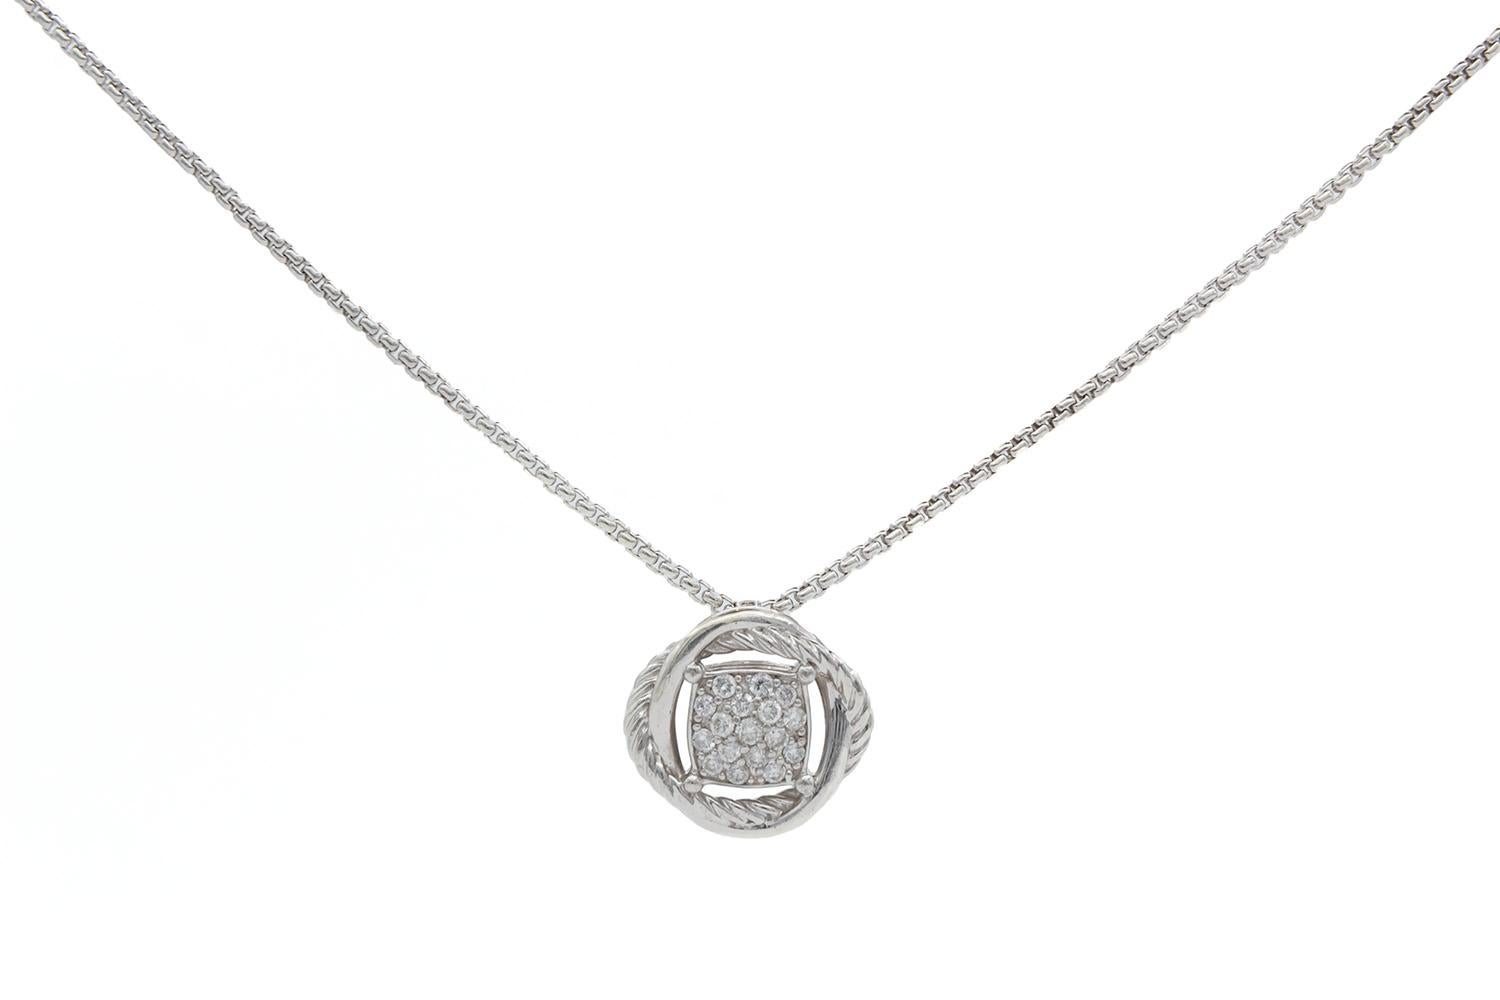 We are pleased to offer this David Yurman Sterling Silver & Diamond Pave Infinity Cable Necklace Pendant. The Infinity line features the classic David Yurman styling and can be worn or day or night, casually and effortlessly. The pendant is 15mm x